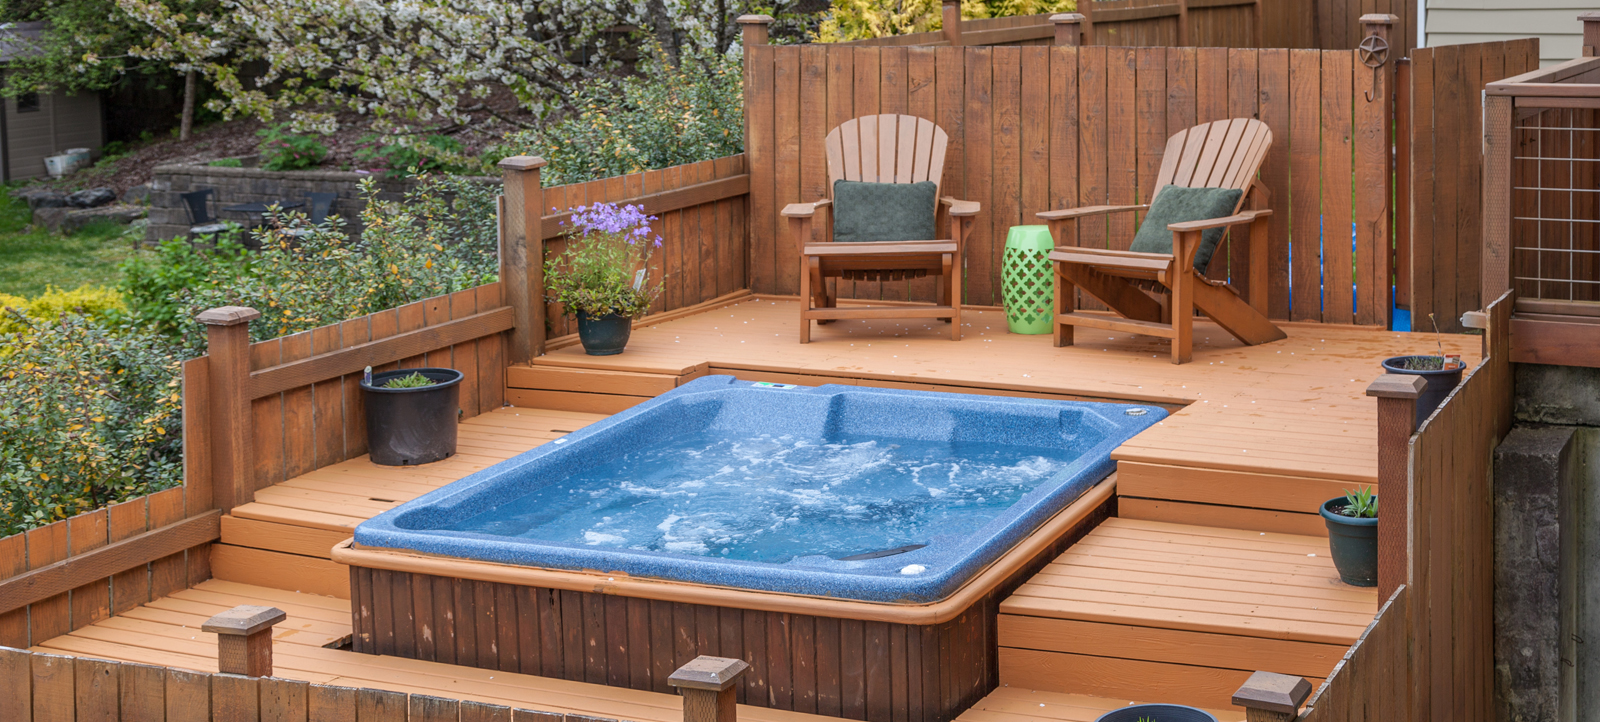 Hot tub on the patio deck